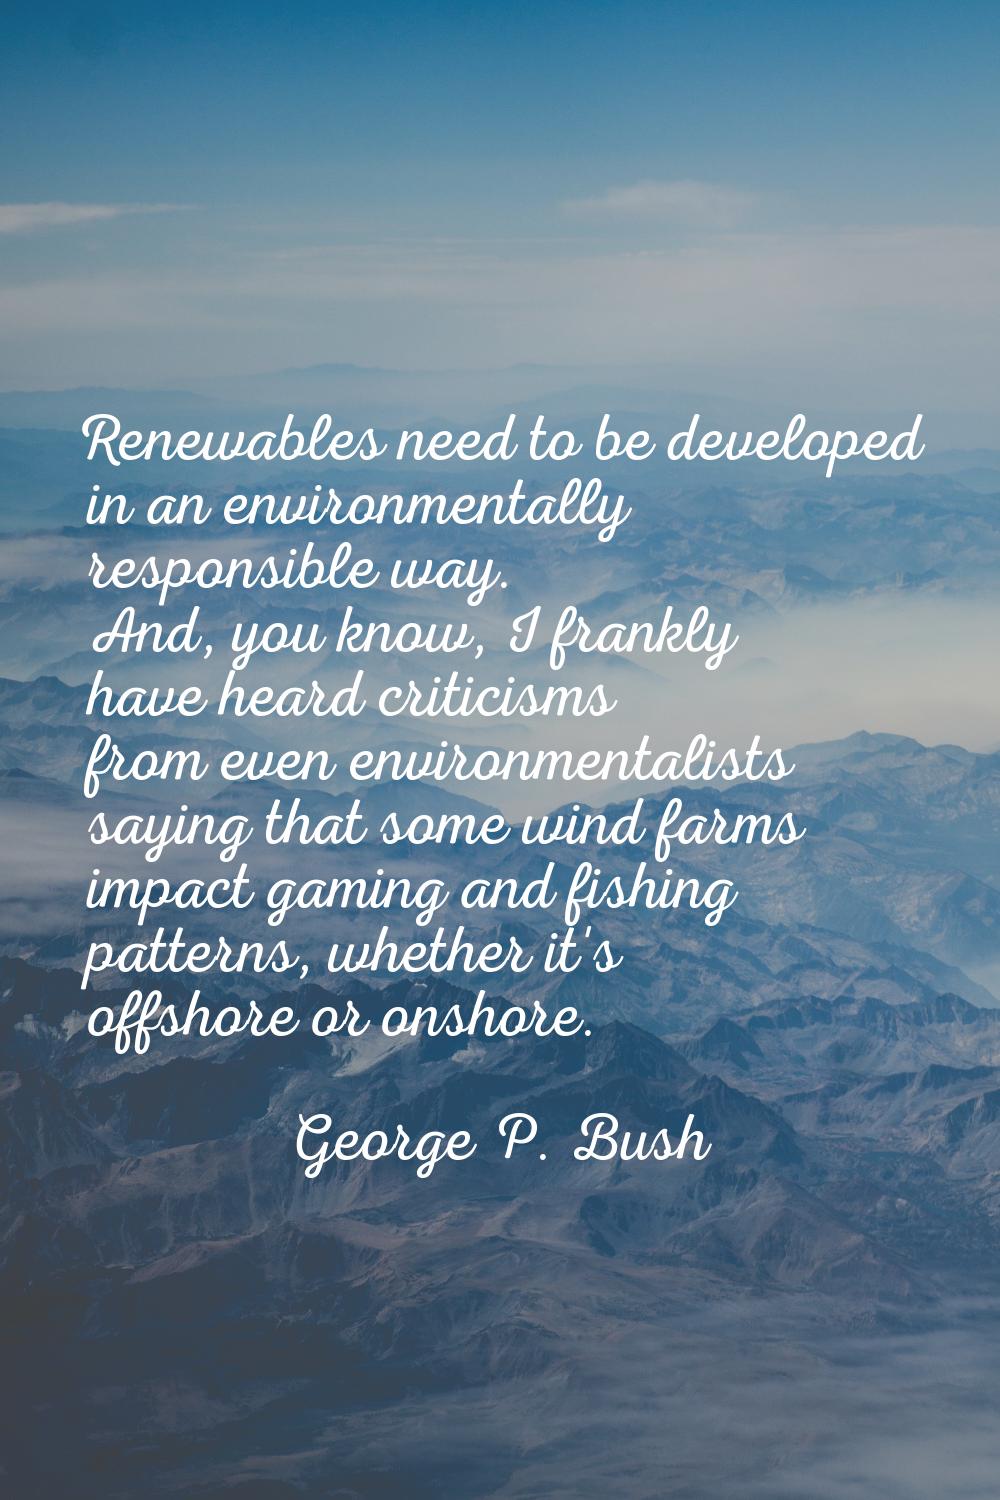 Renewables need to be developed in an environmentally responsible way. And, you know, I frankly hav